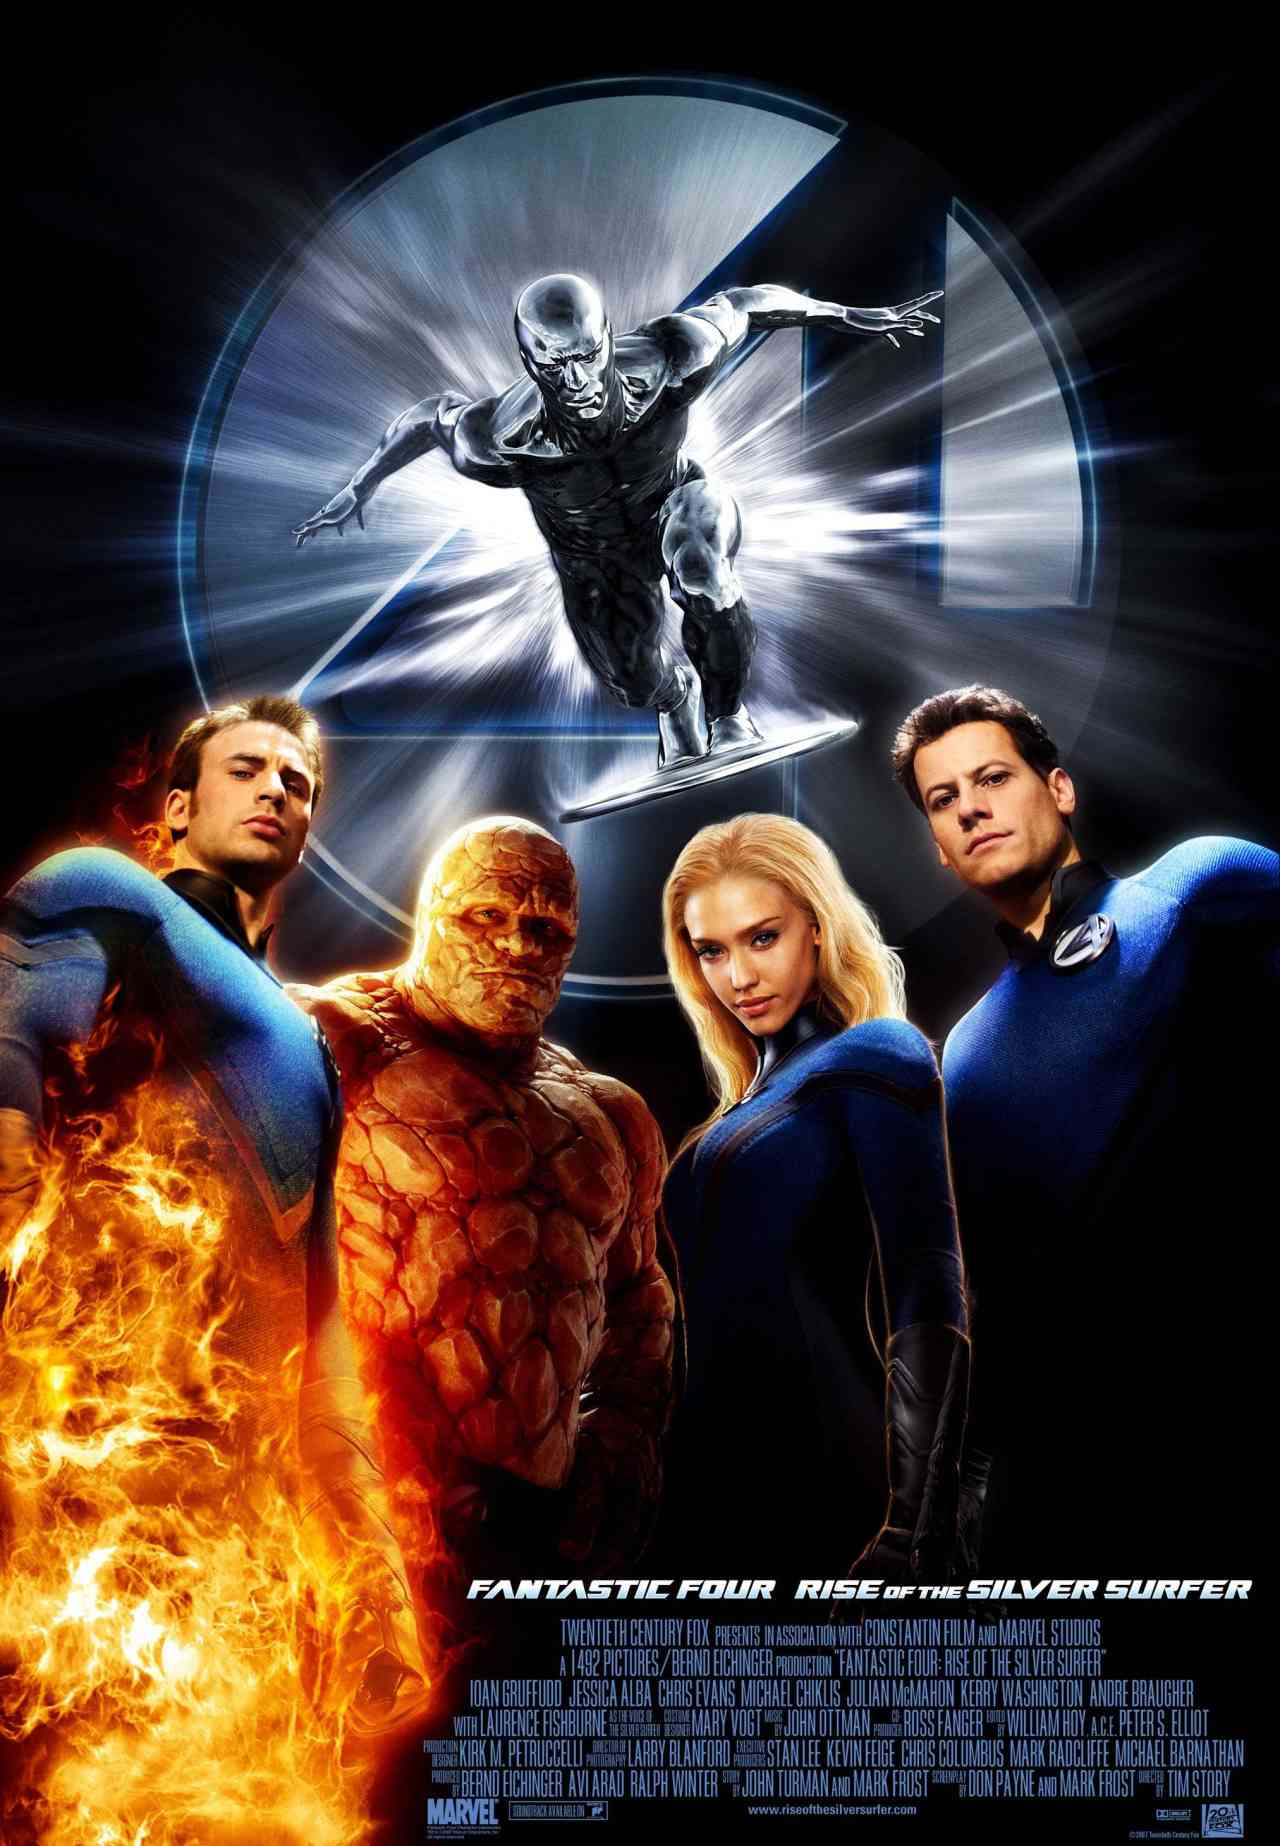 FULL MOVIE: Fantastic Four: Rise of the Silver Surfer (2007)